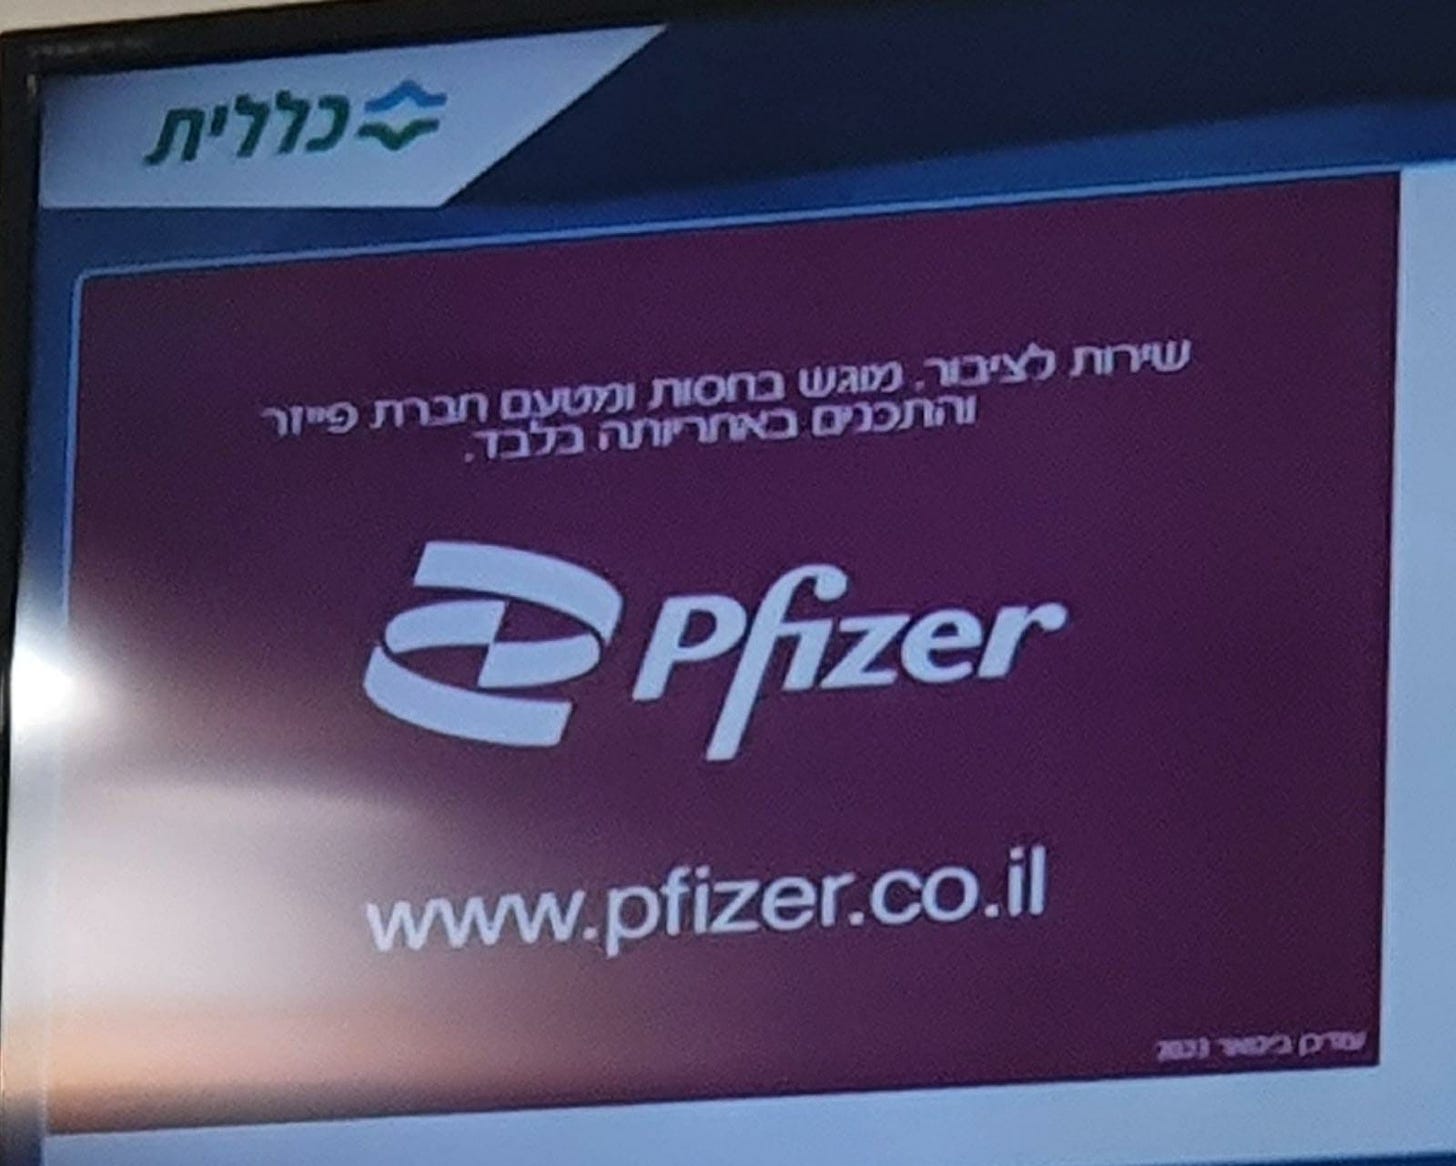 Reads "Public Service. Sponsored by and on behalf of Pfizer which is solely responsible for the content." 